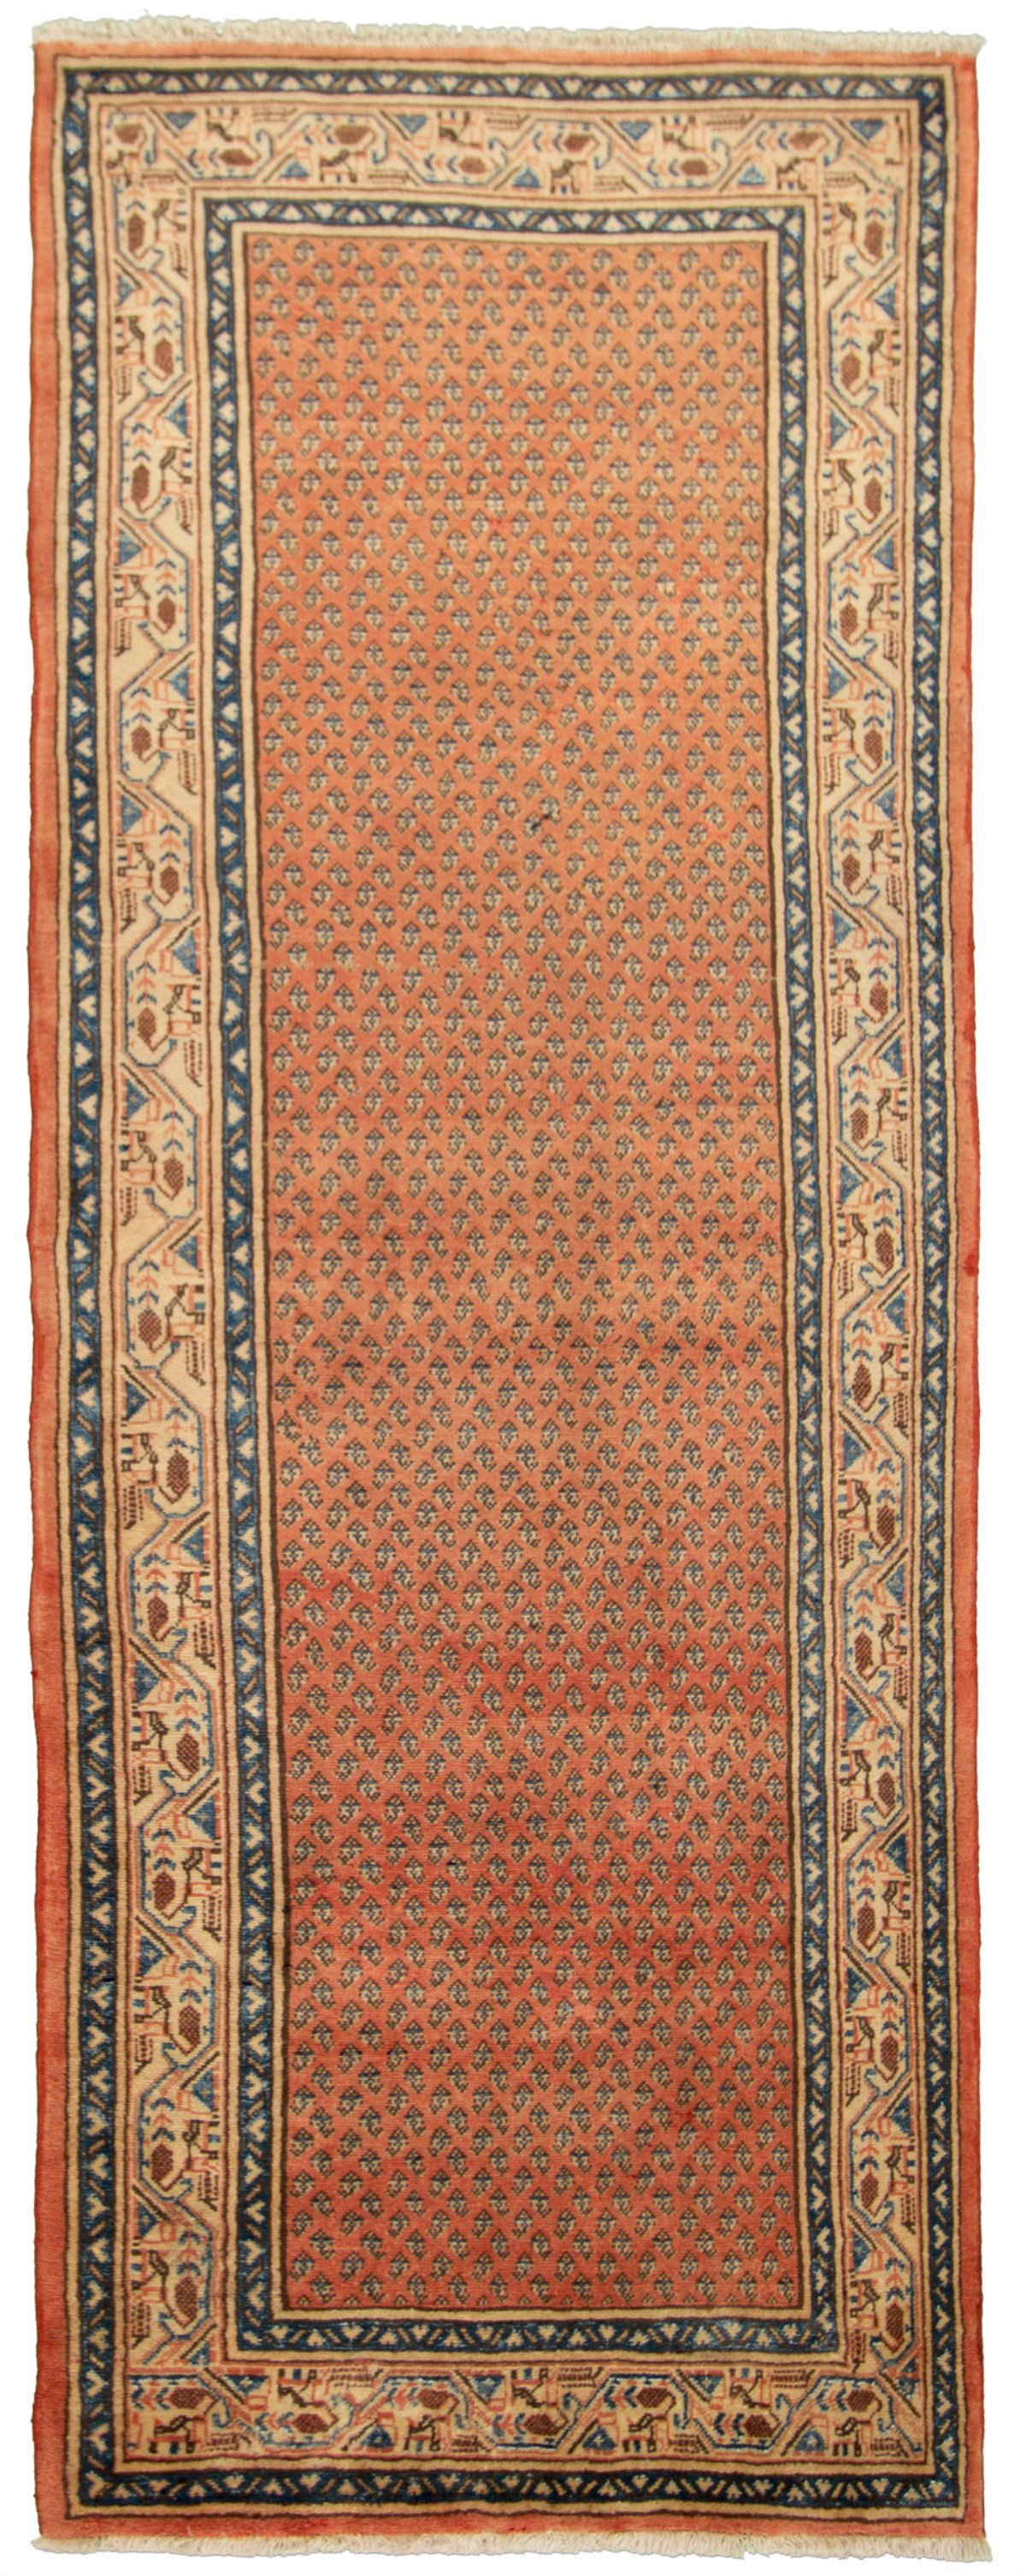 Hand-knotted Arak Copper Wool Rug 3'11" x 10'7" Size: 3'11" x 10'7"  